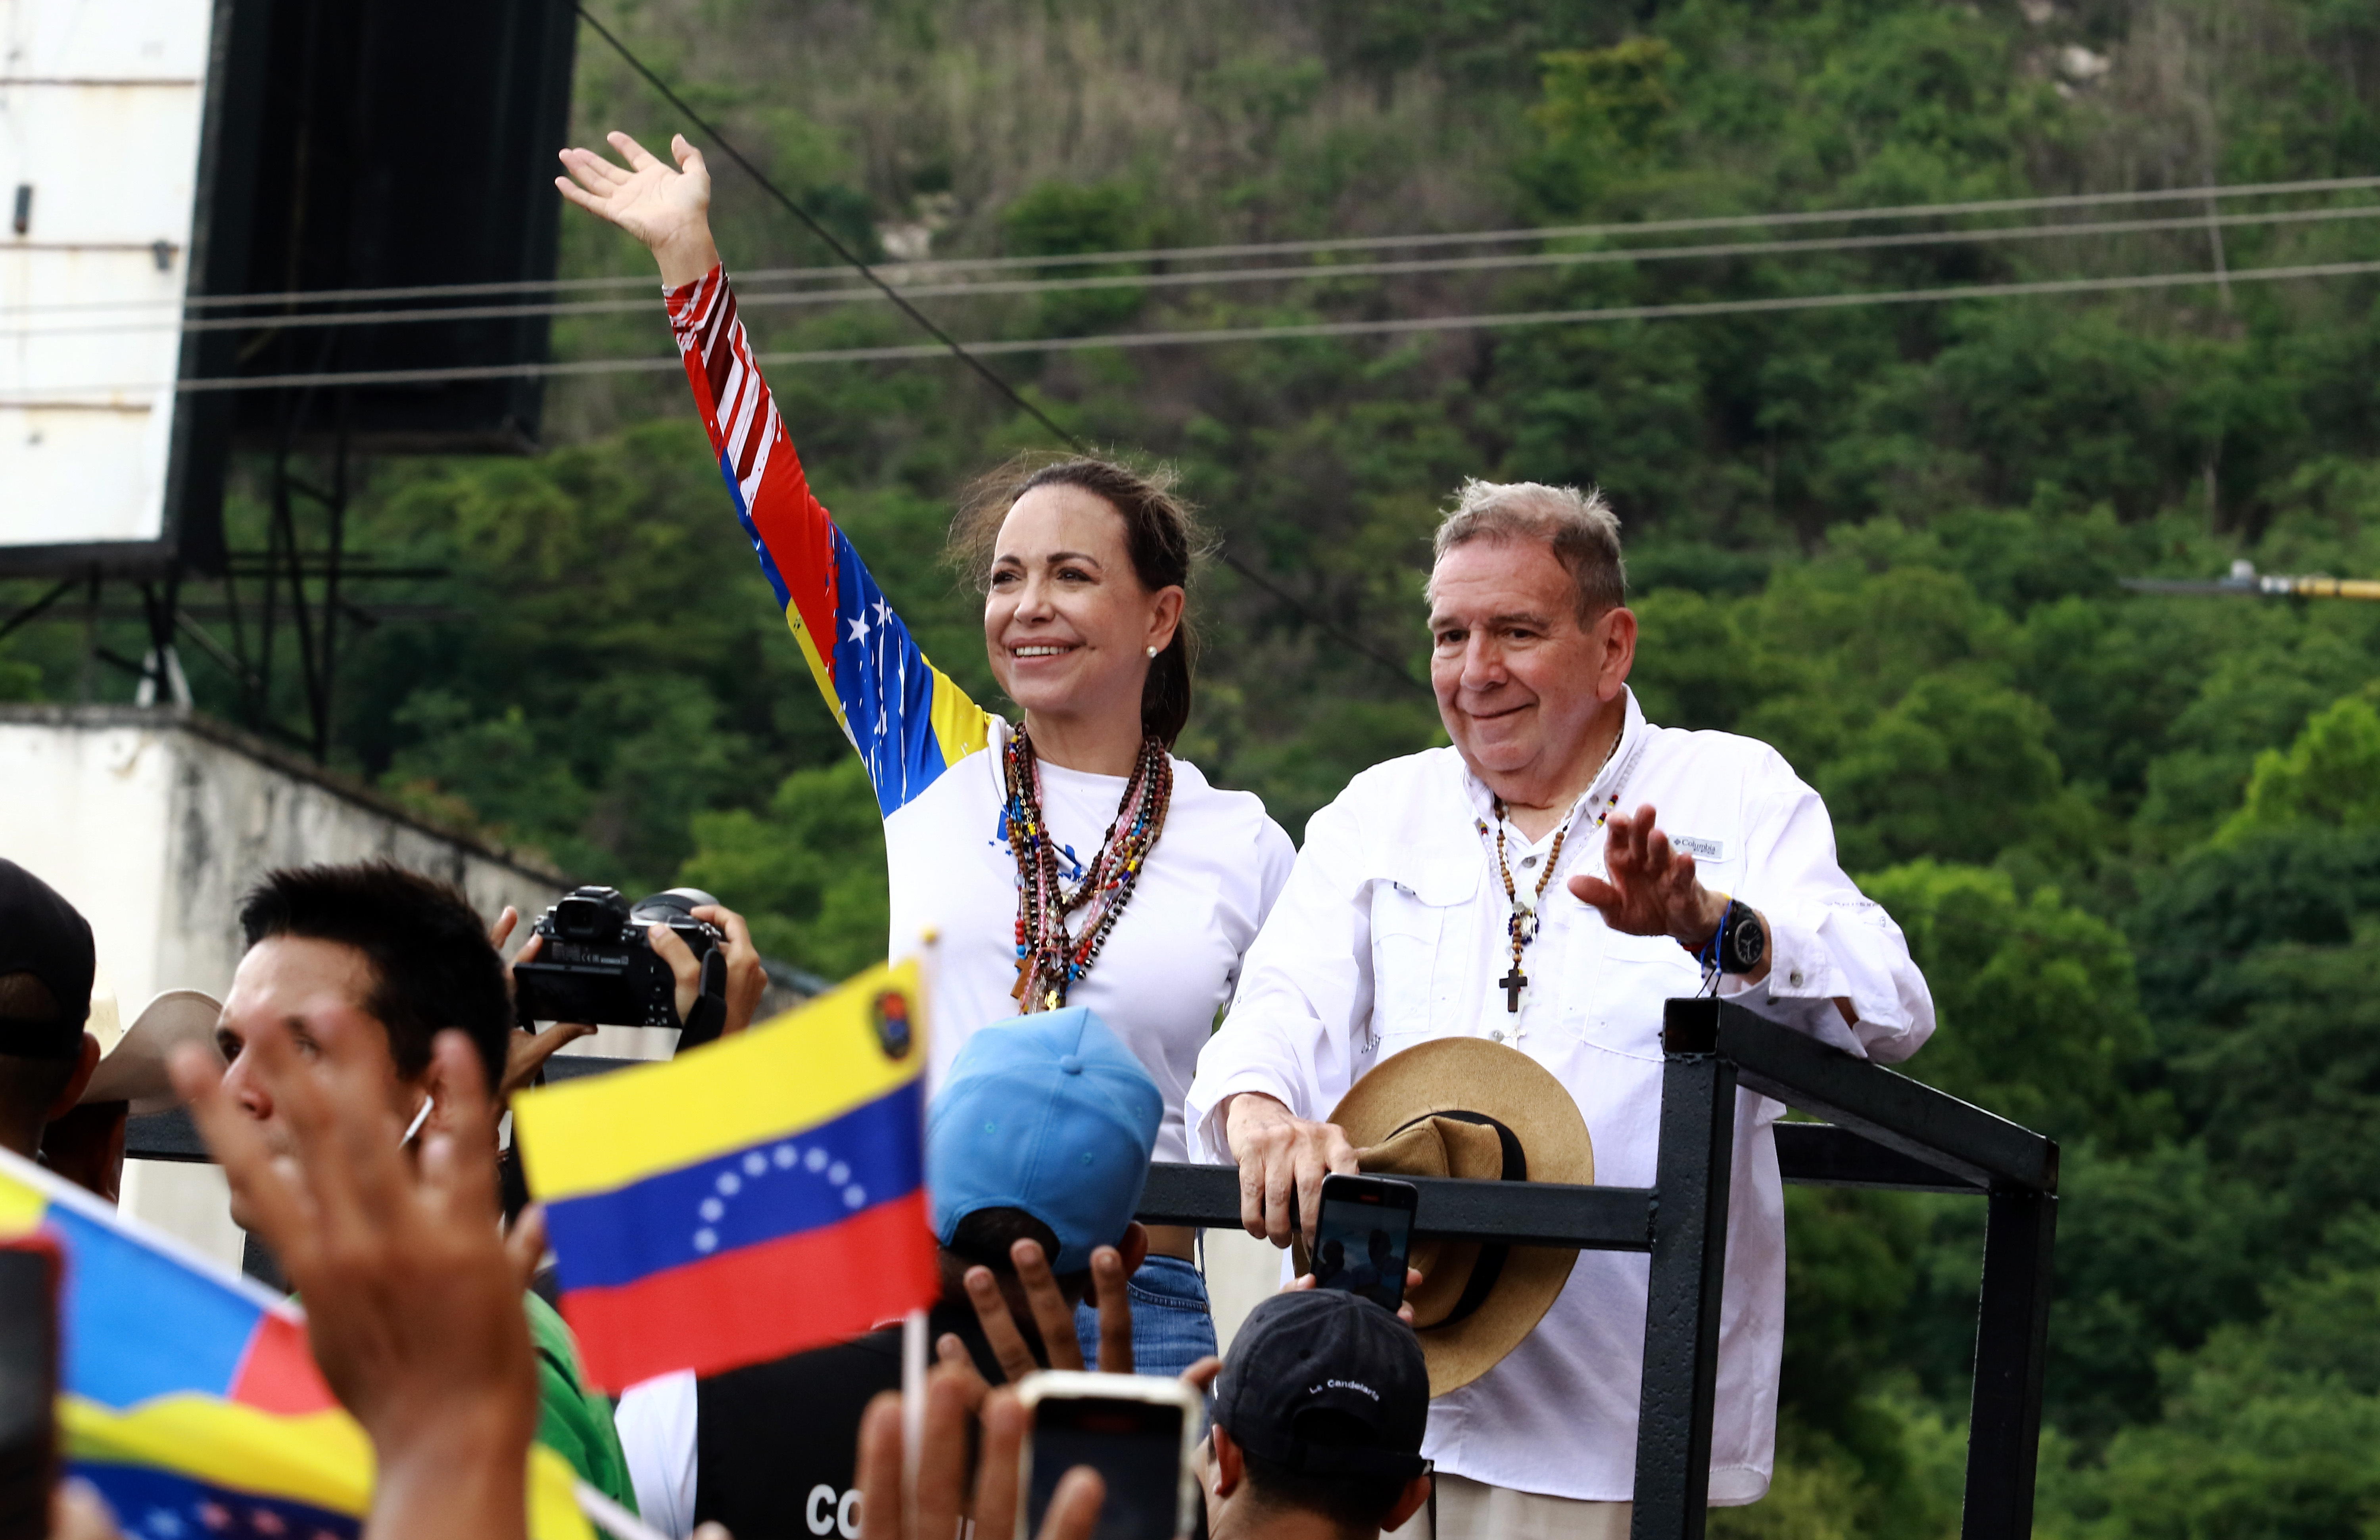 Although prominent politicians such as the liberal opposition leader María Corina Machado and others have been barred from running, their support for the independent candidate Edmundo González has mobilized the opposition.